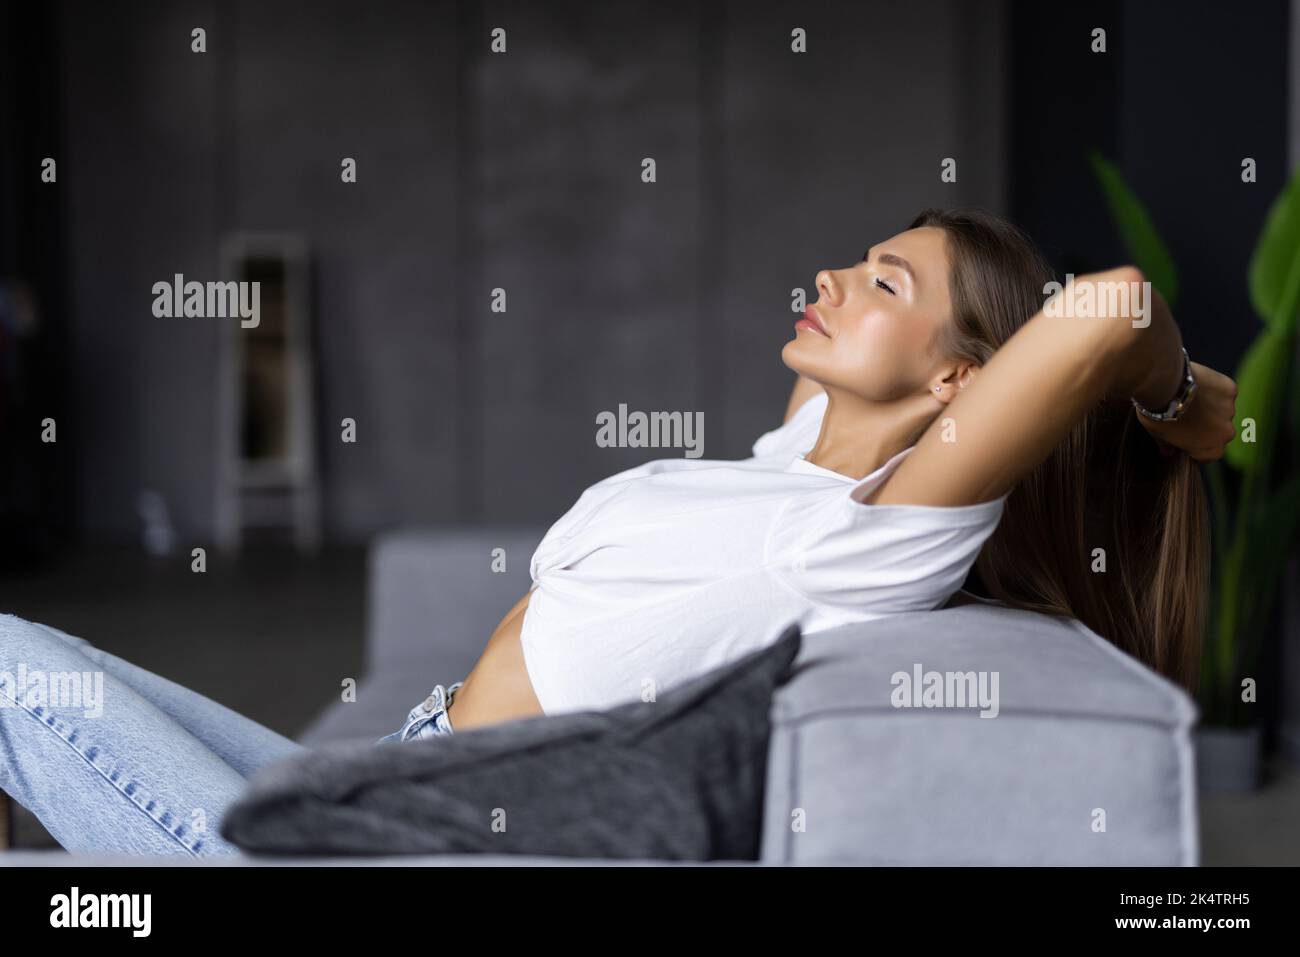 Calm serene young woman relaxing on comfortable couch at home with closed eyes and hands behind head, satisfied girl stretching on sofa, daydreaming a Stock Photo